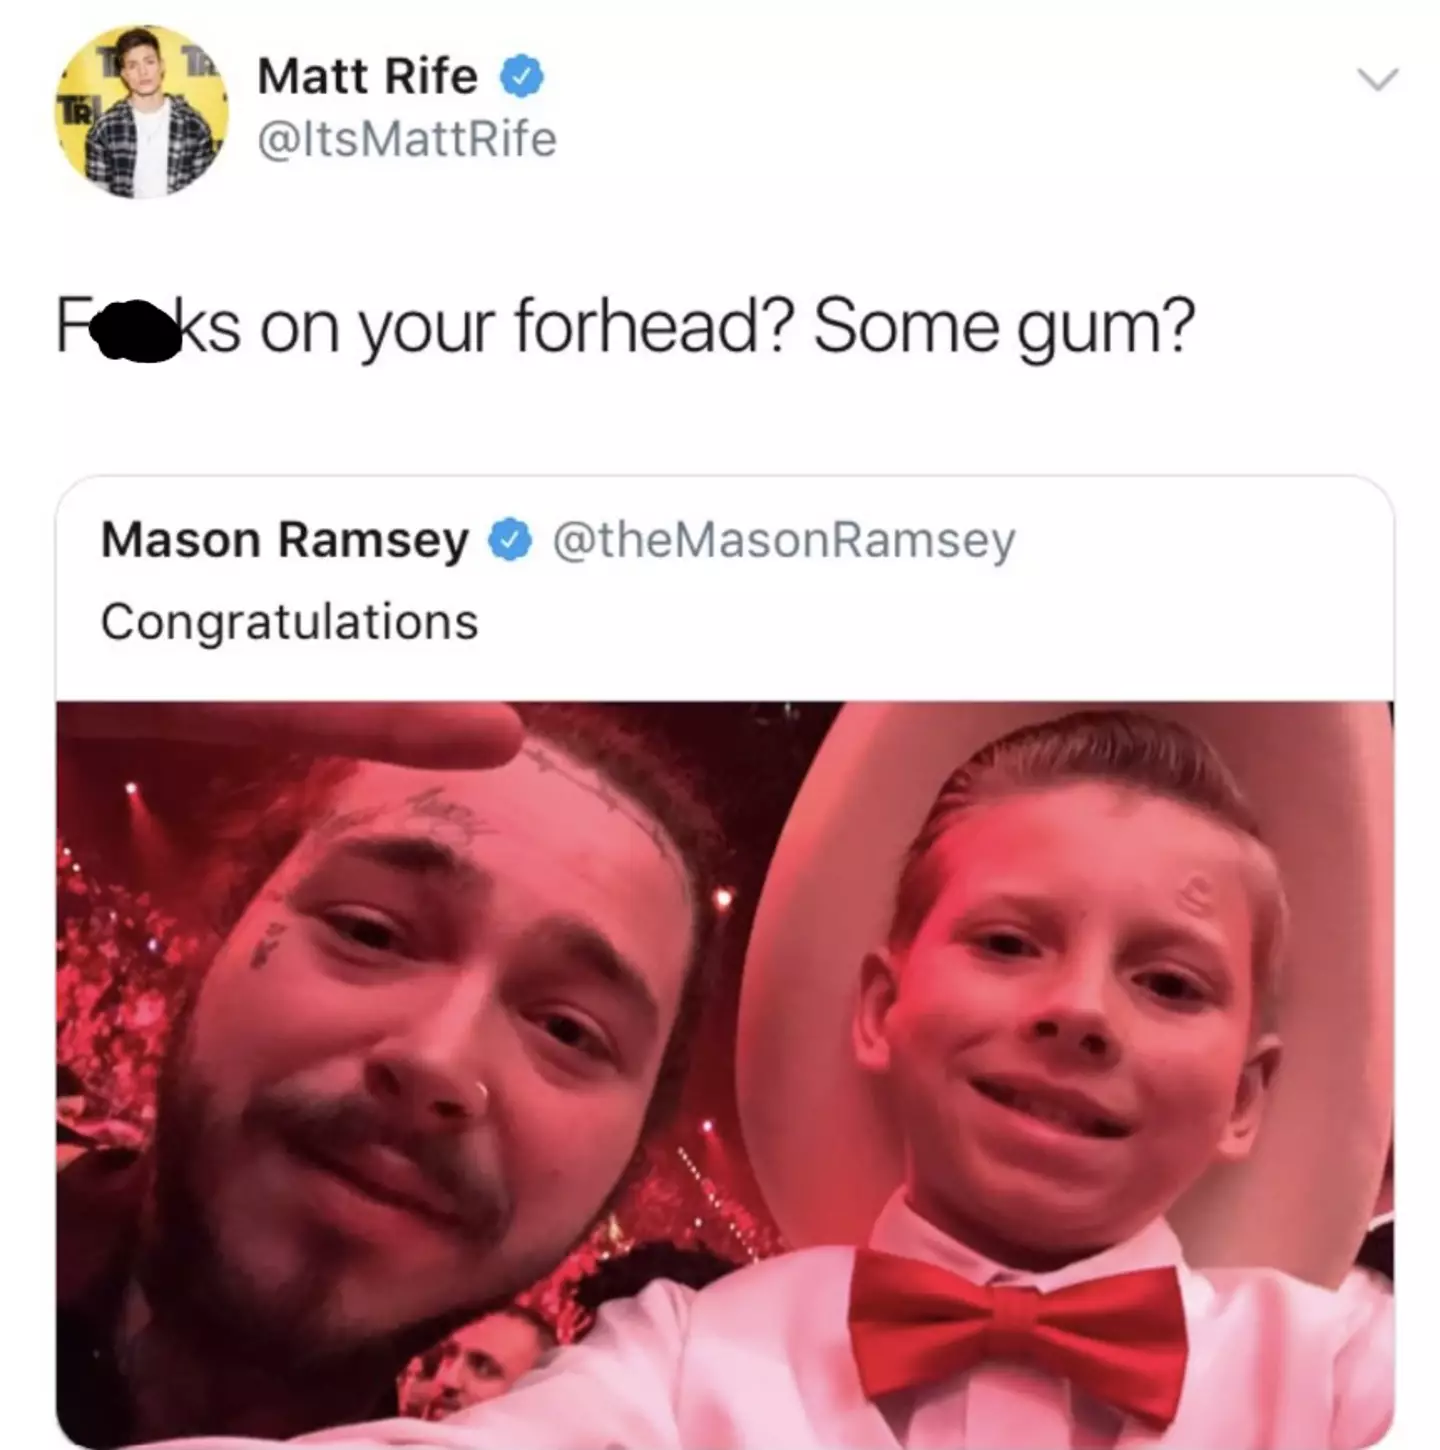 Rife picked on 12-year-old Ramsey in 2018.